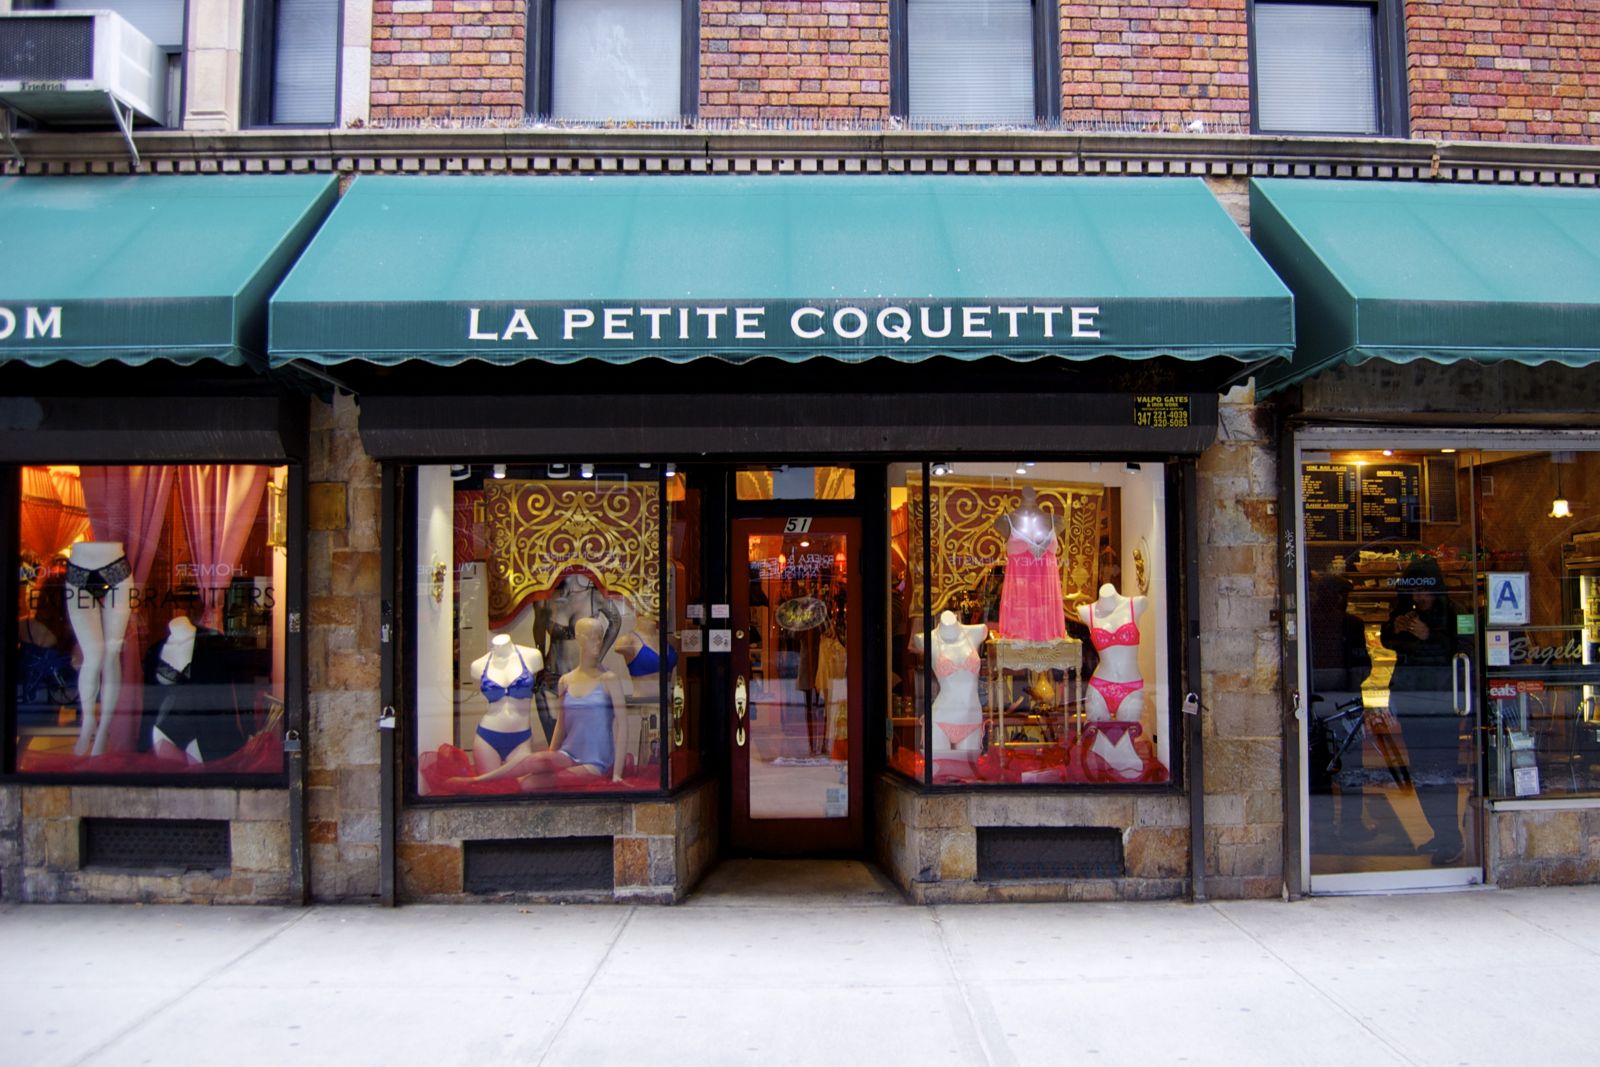 Local Artisan of the day is La Petite Coquette. This Greenwich